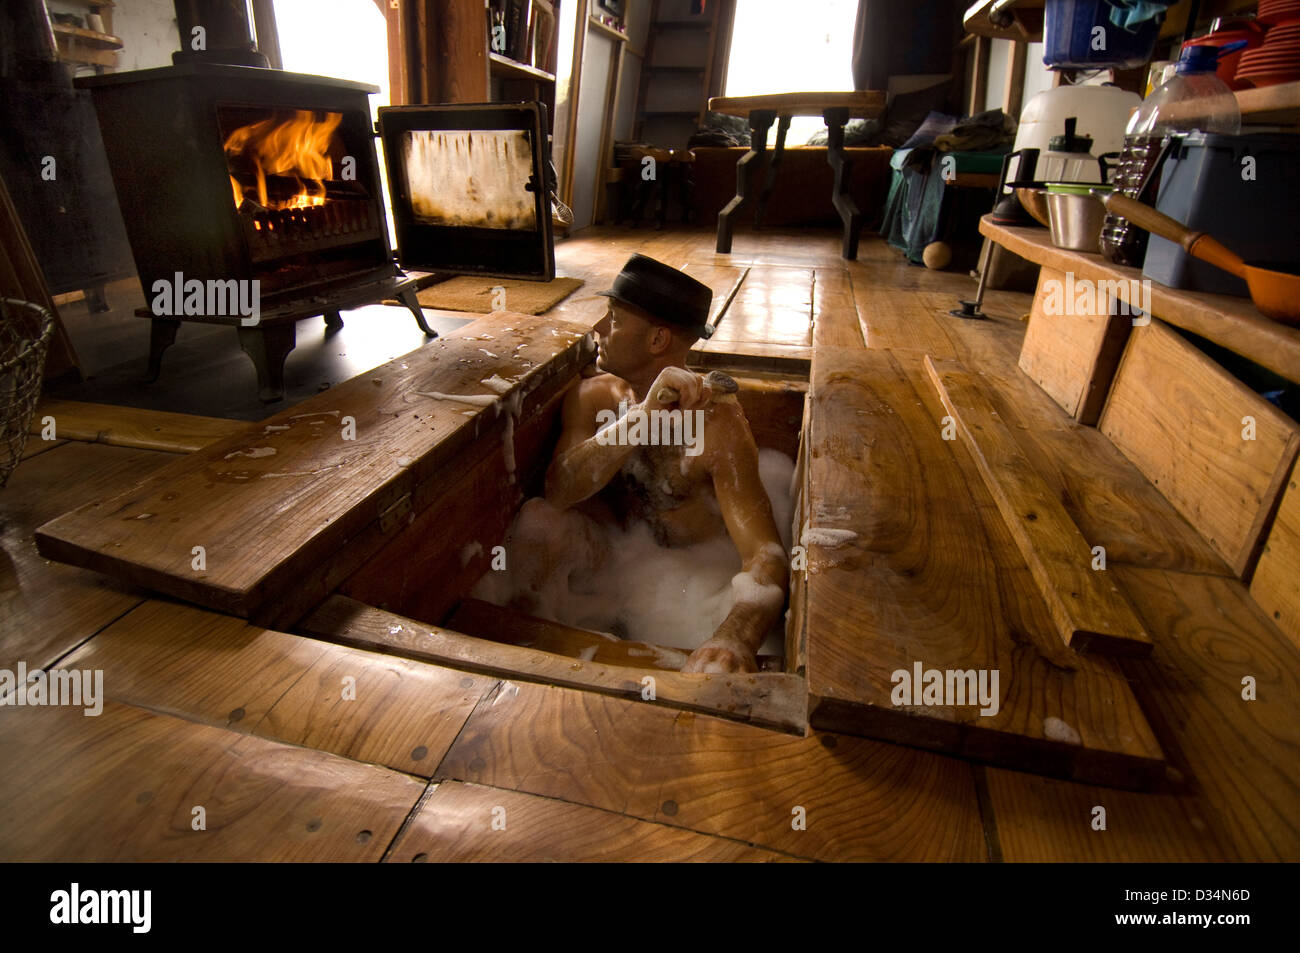 Man in a hat in the underfloor bath of his hand-made caravan home. Stock Photo